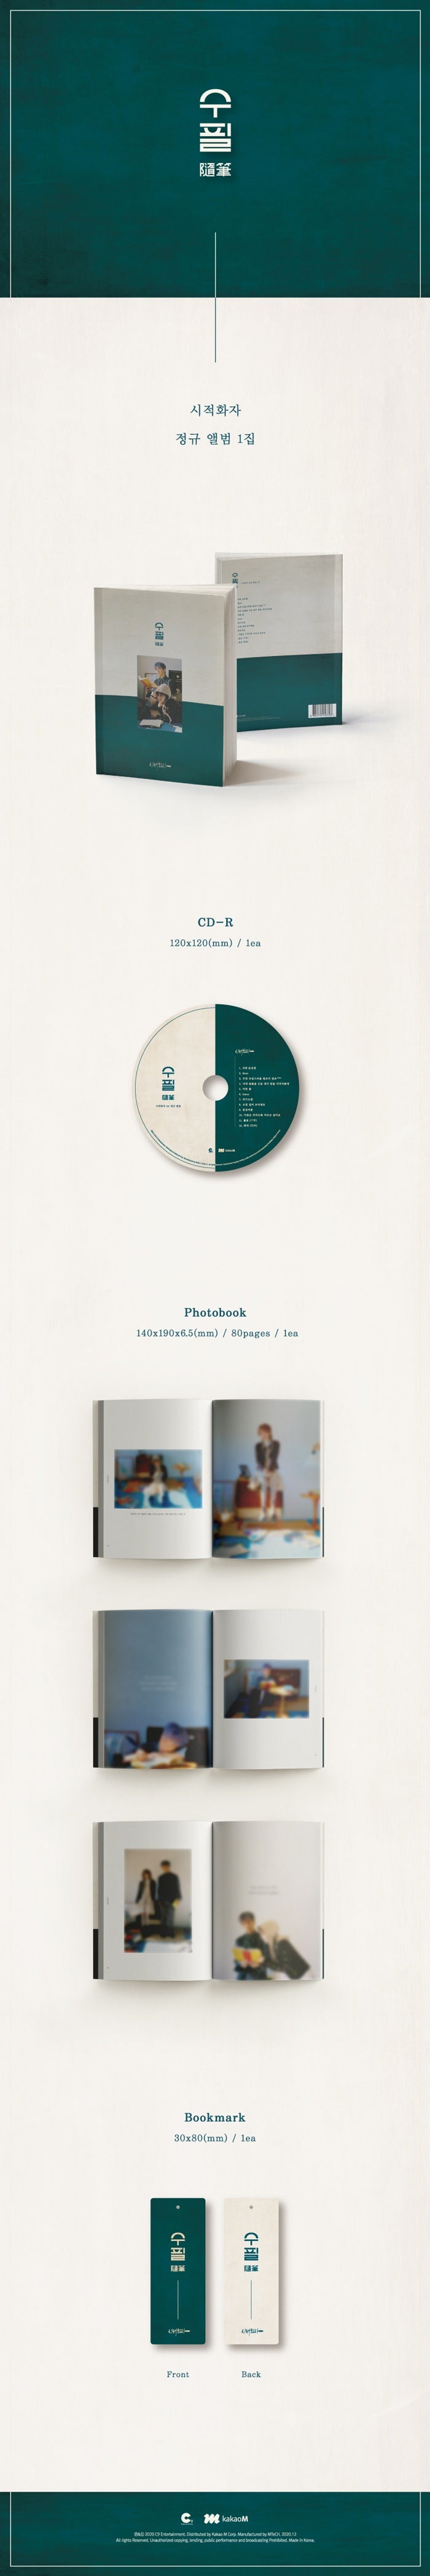 1 CD
1 Photo Book (80 pages)
1 Bookmark